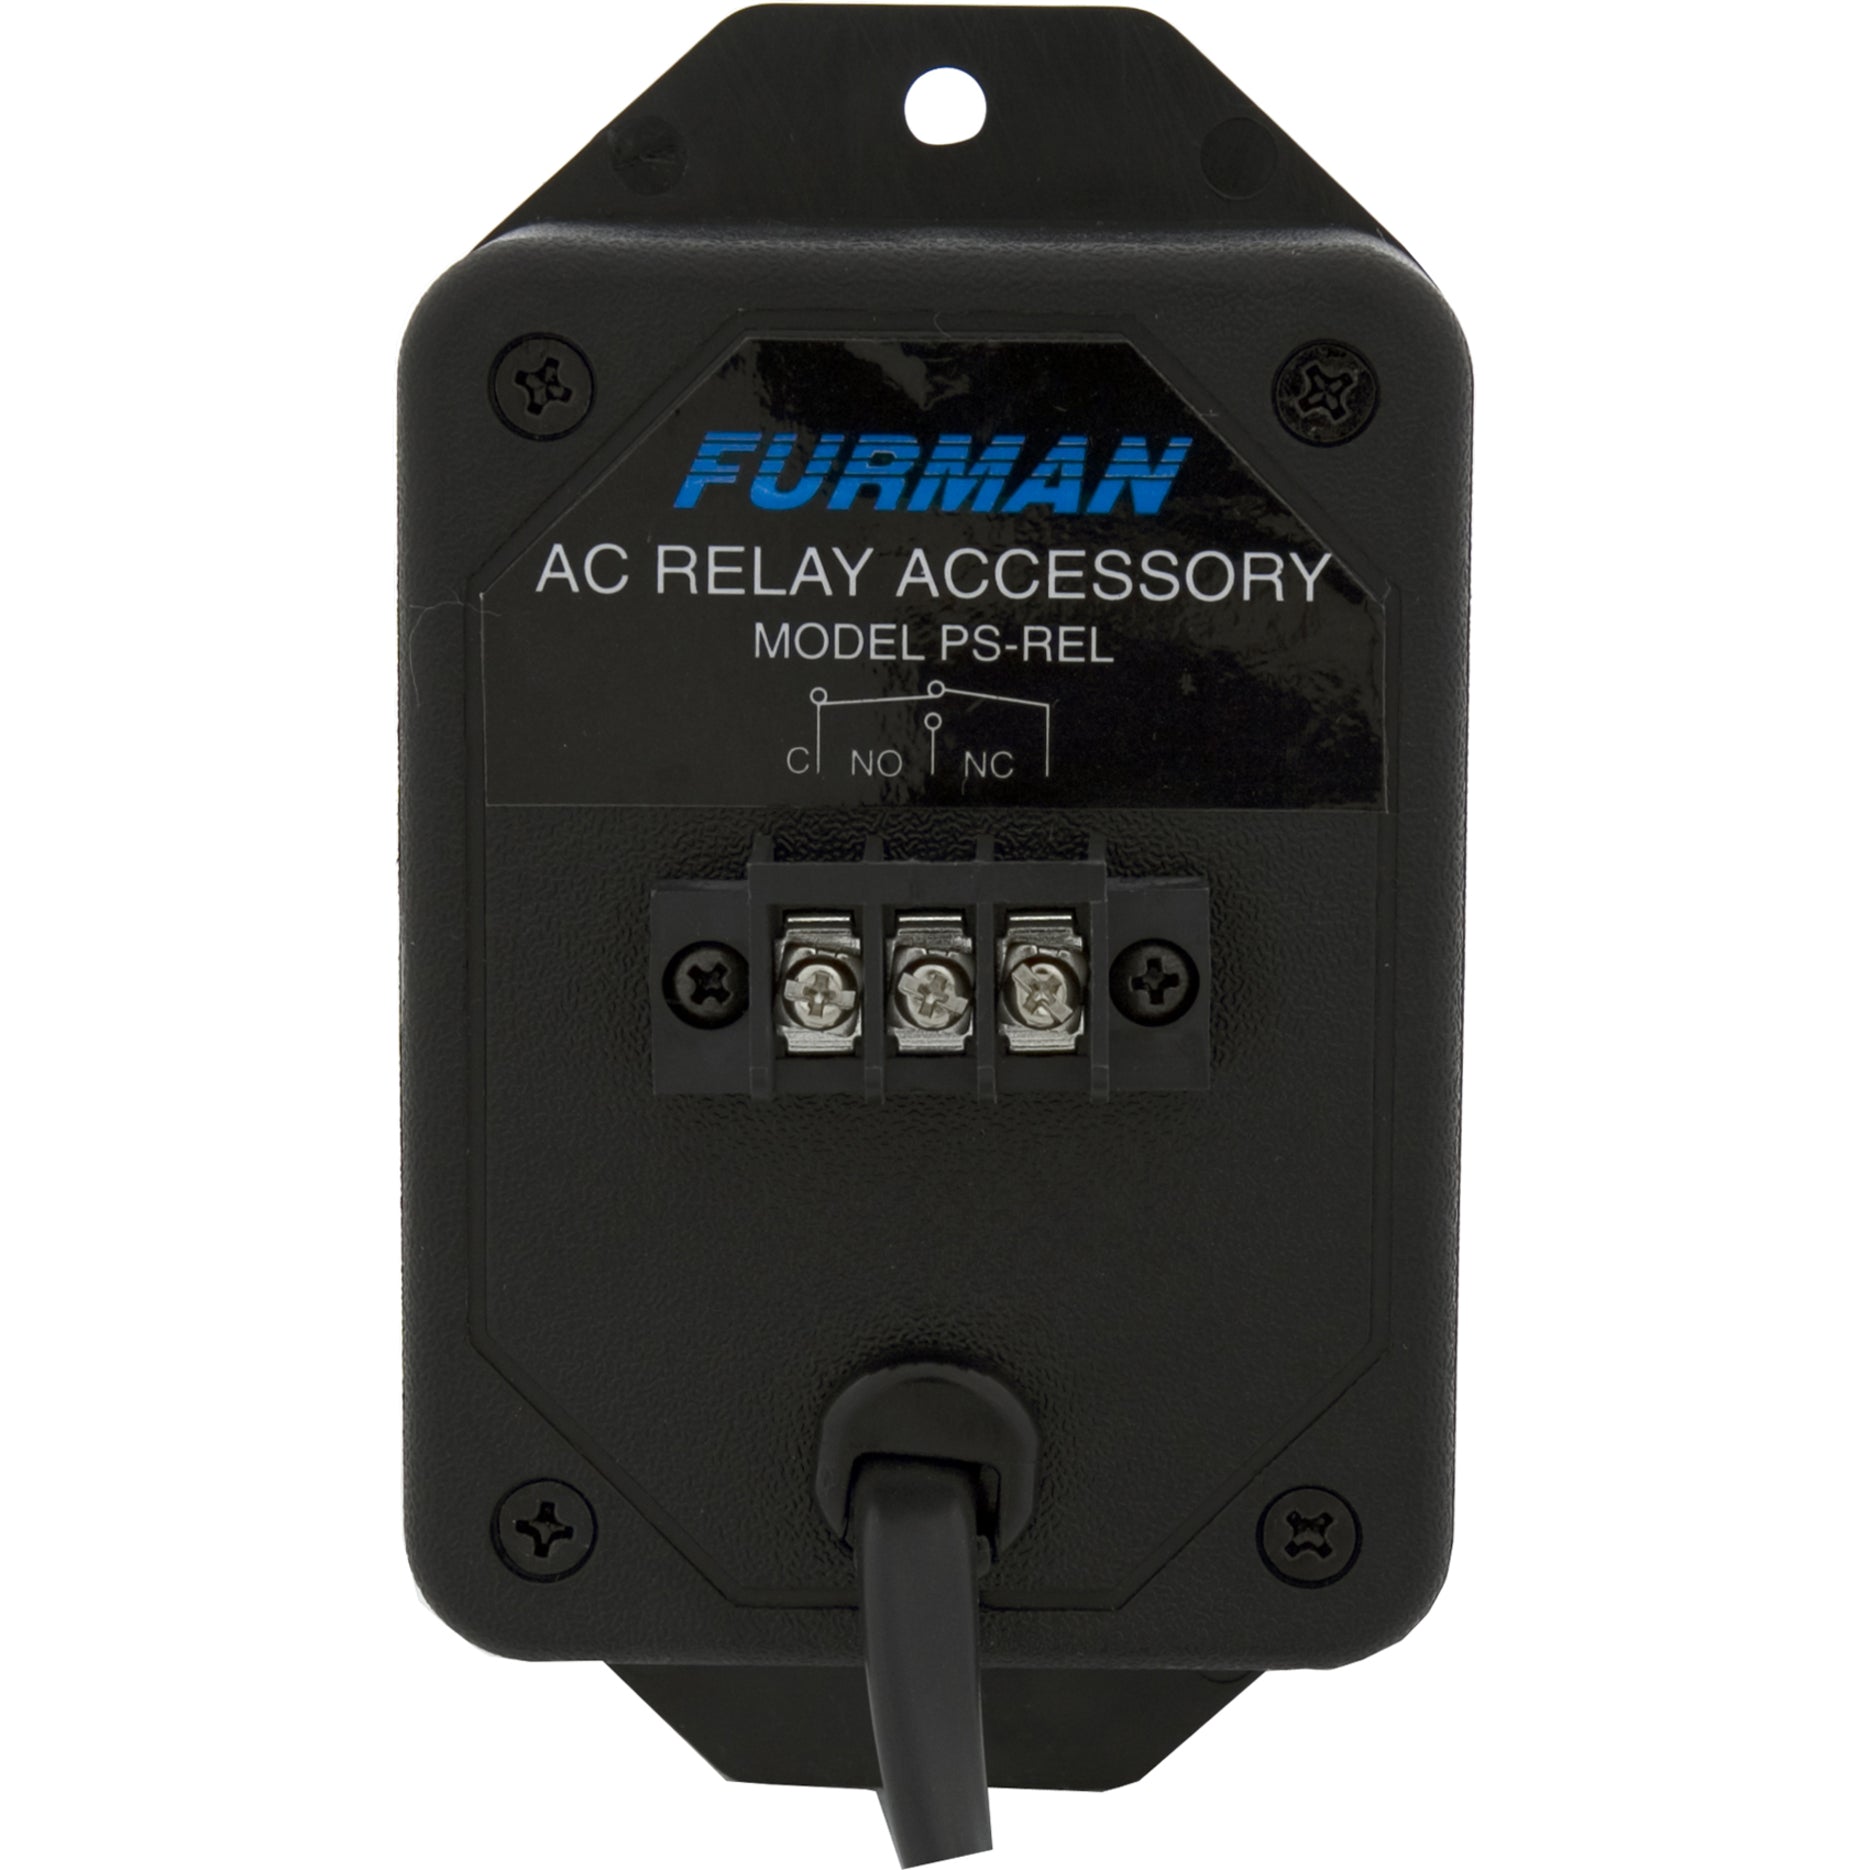 Furman PS-REL Relay Power Sequencer, 3 Year Limited Warranty